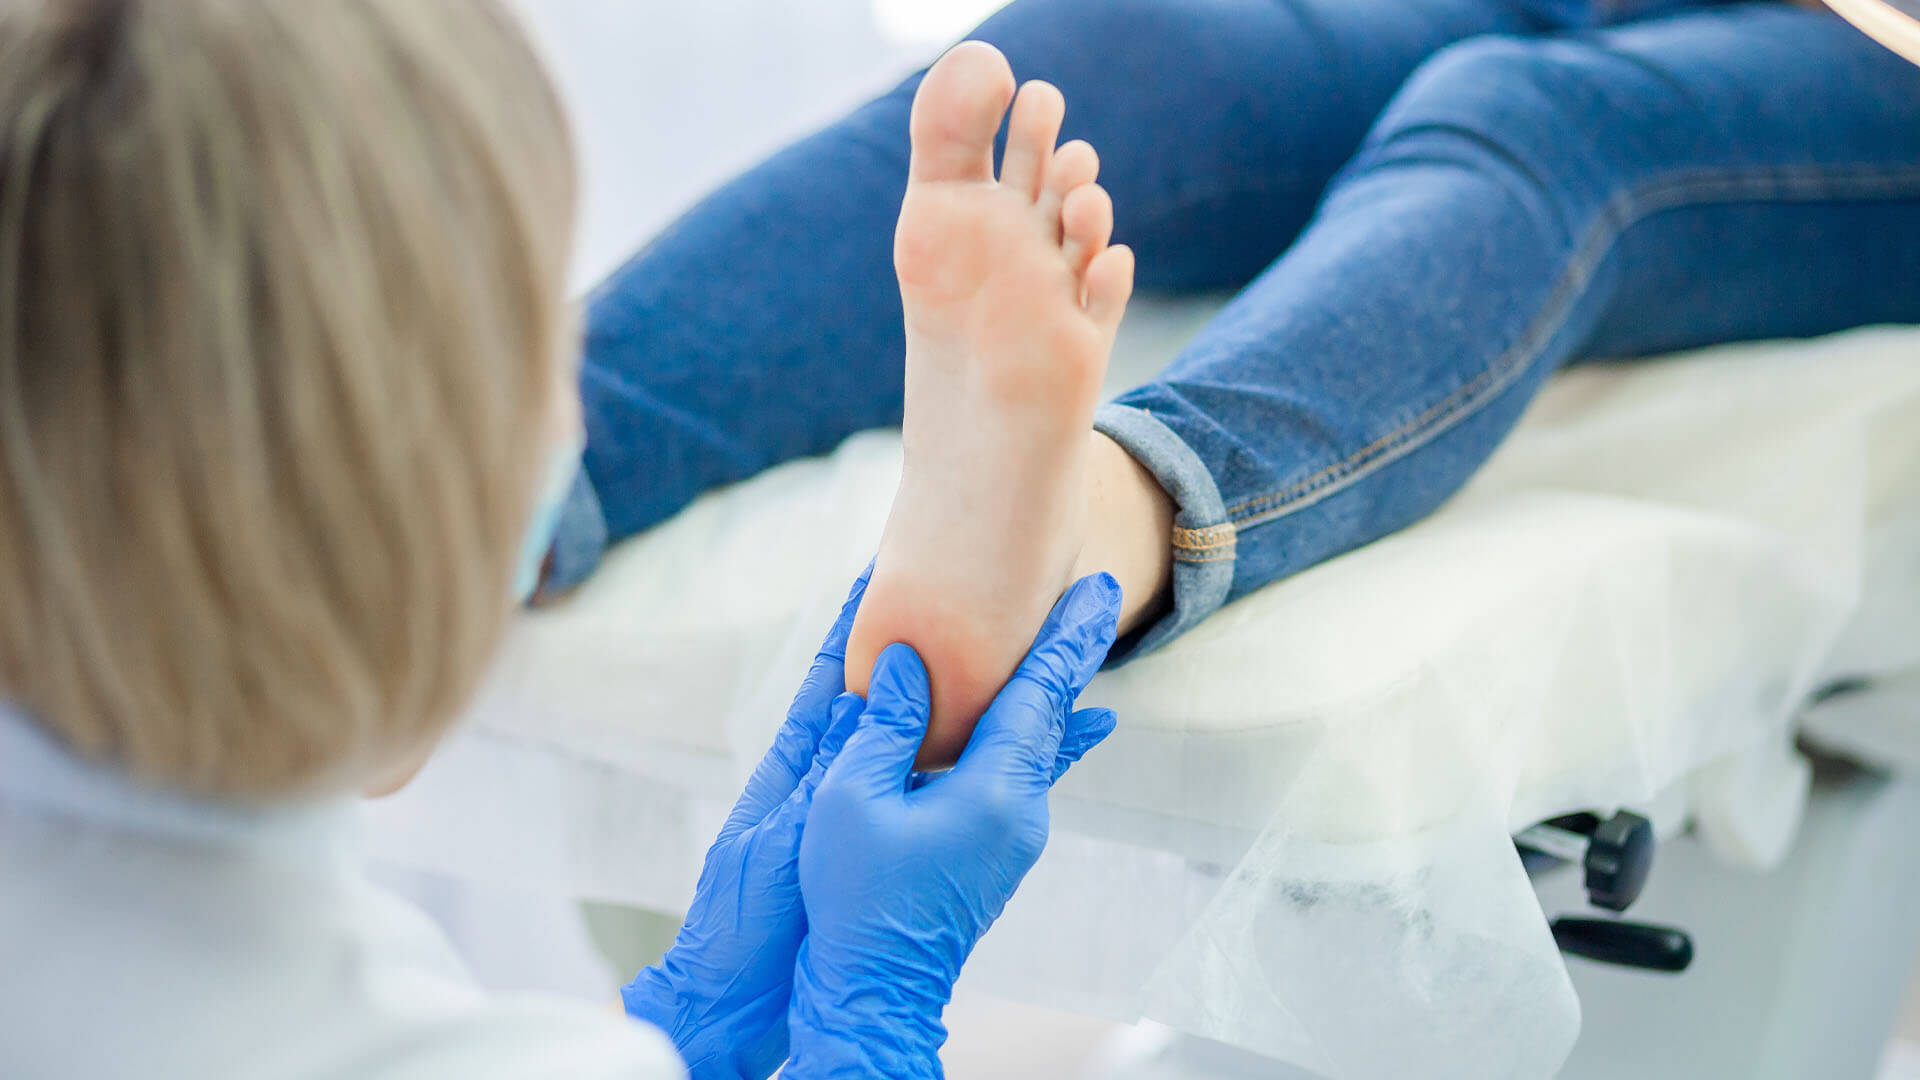 6 Signs You May Have an Underlying Foot Problem